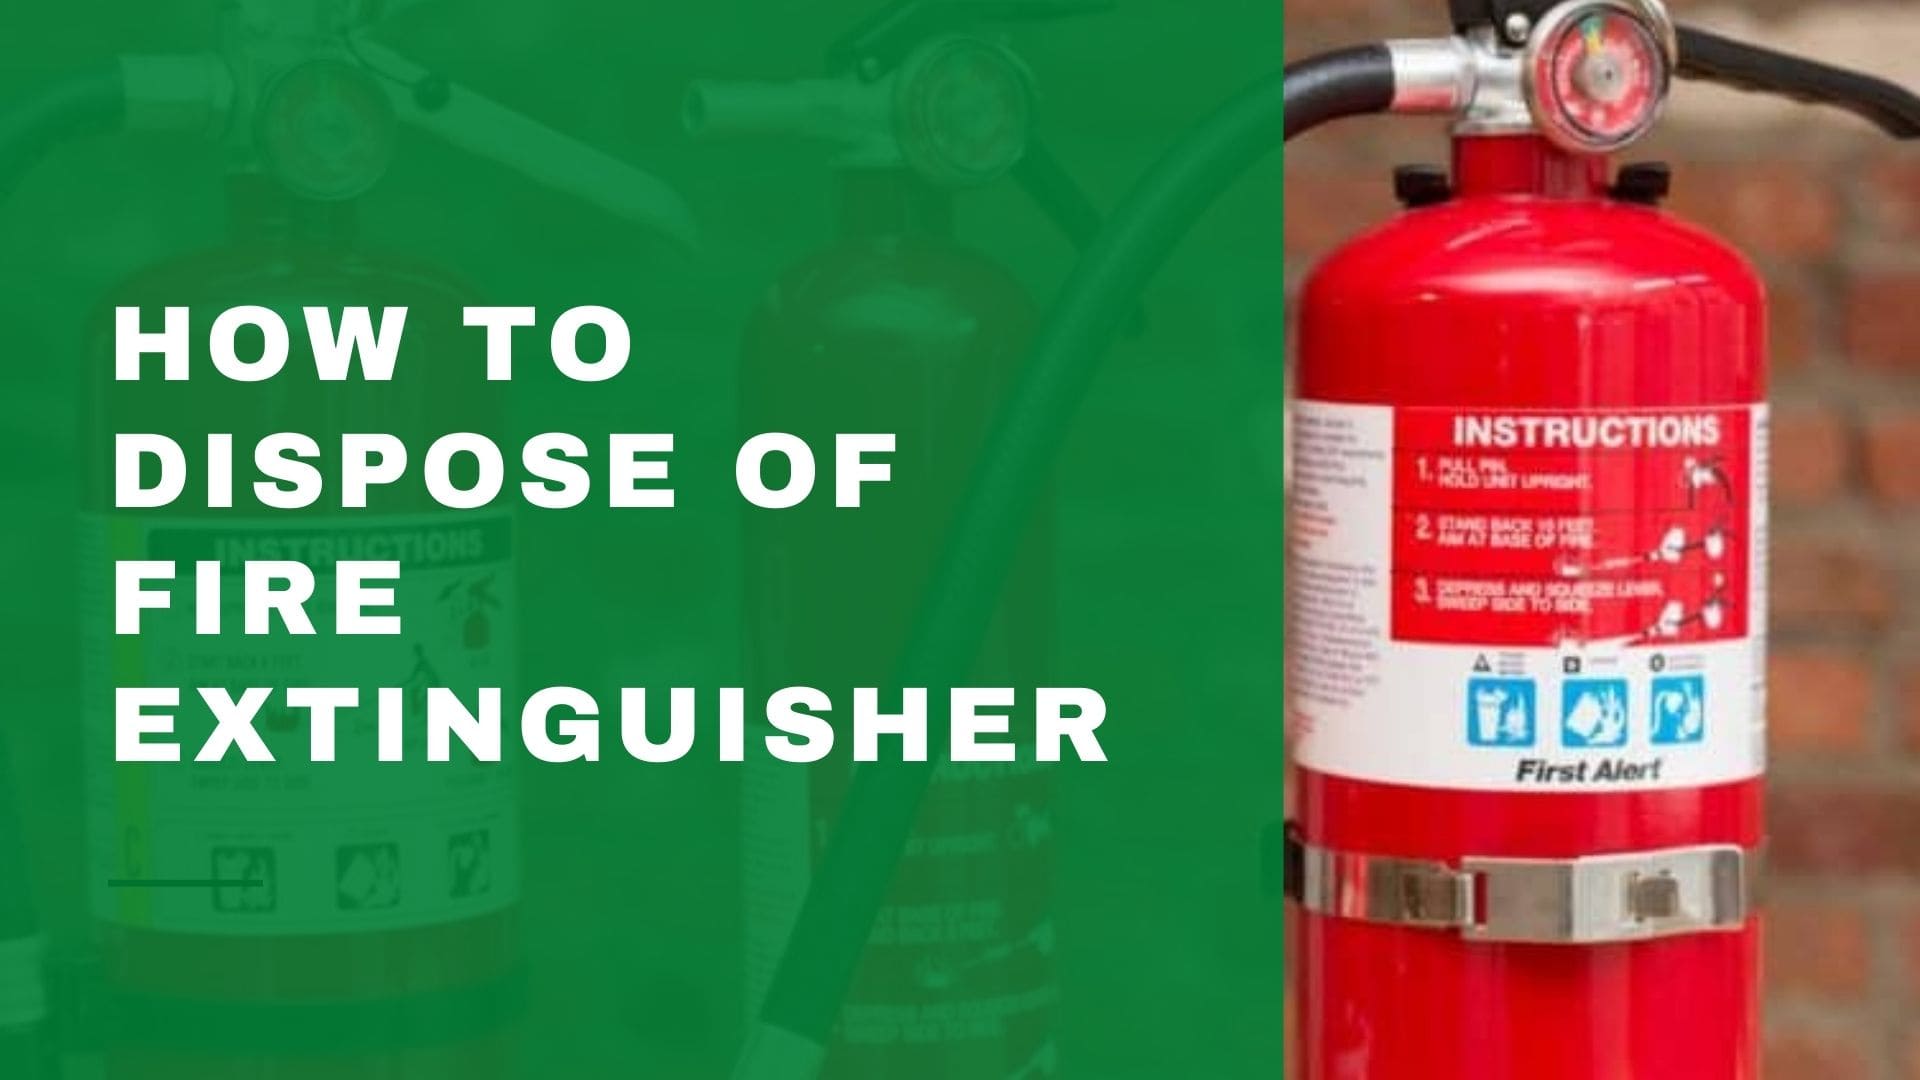 How To Dispose Of Fire Extinguisher